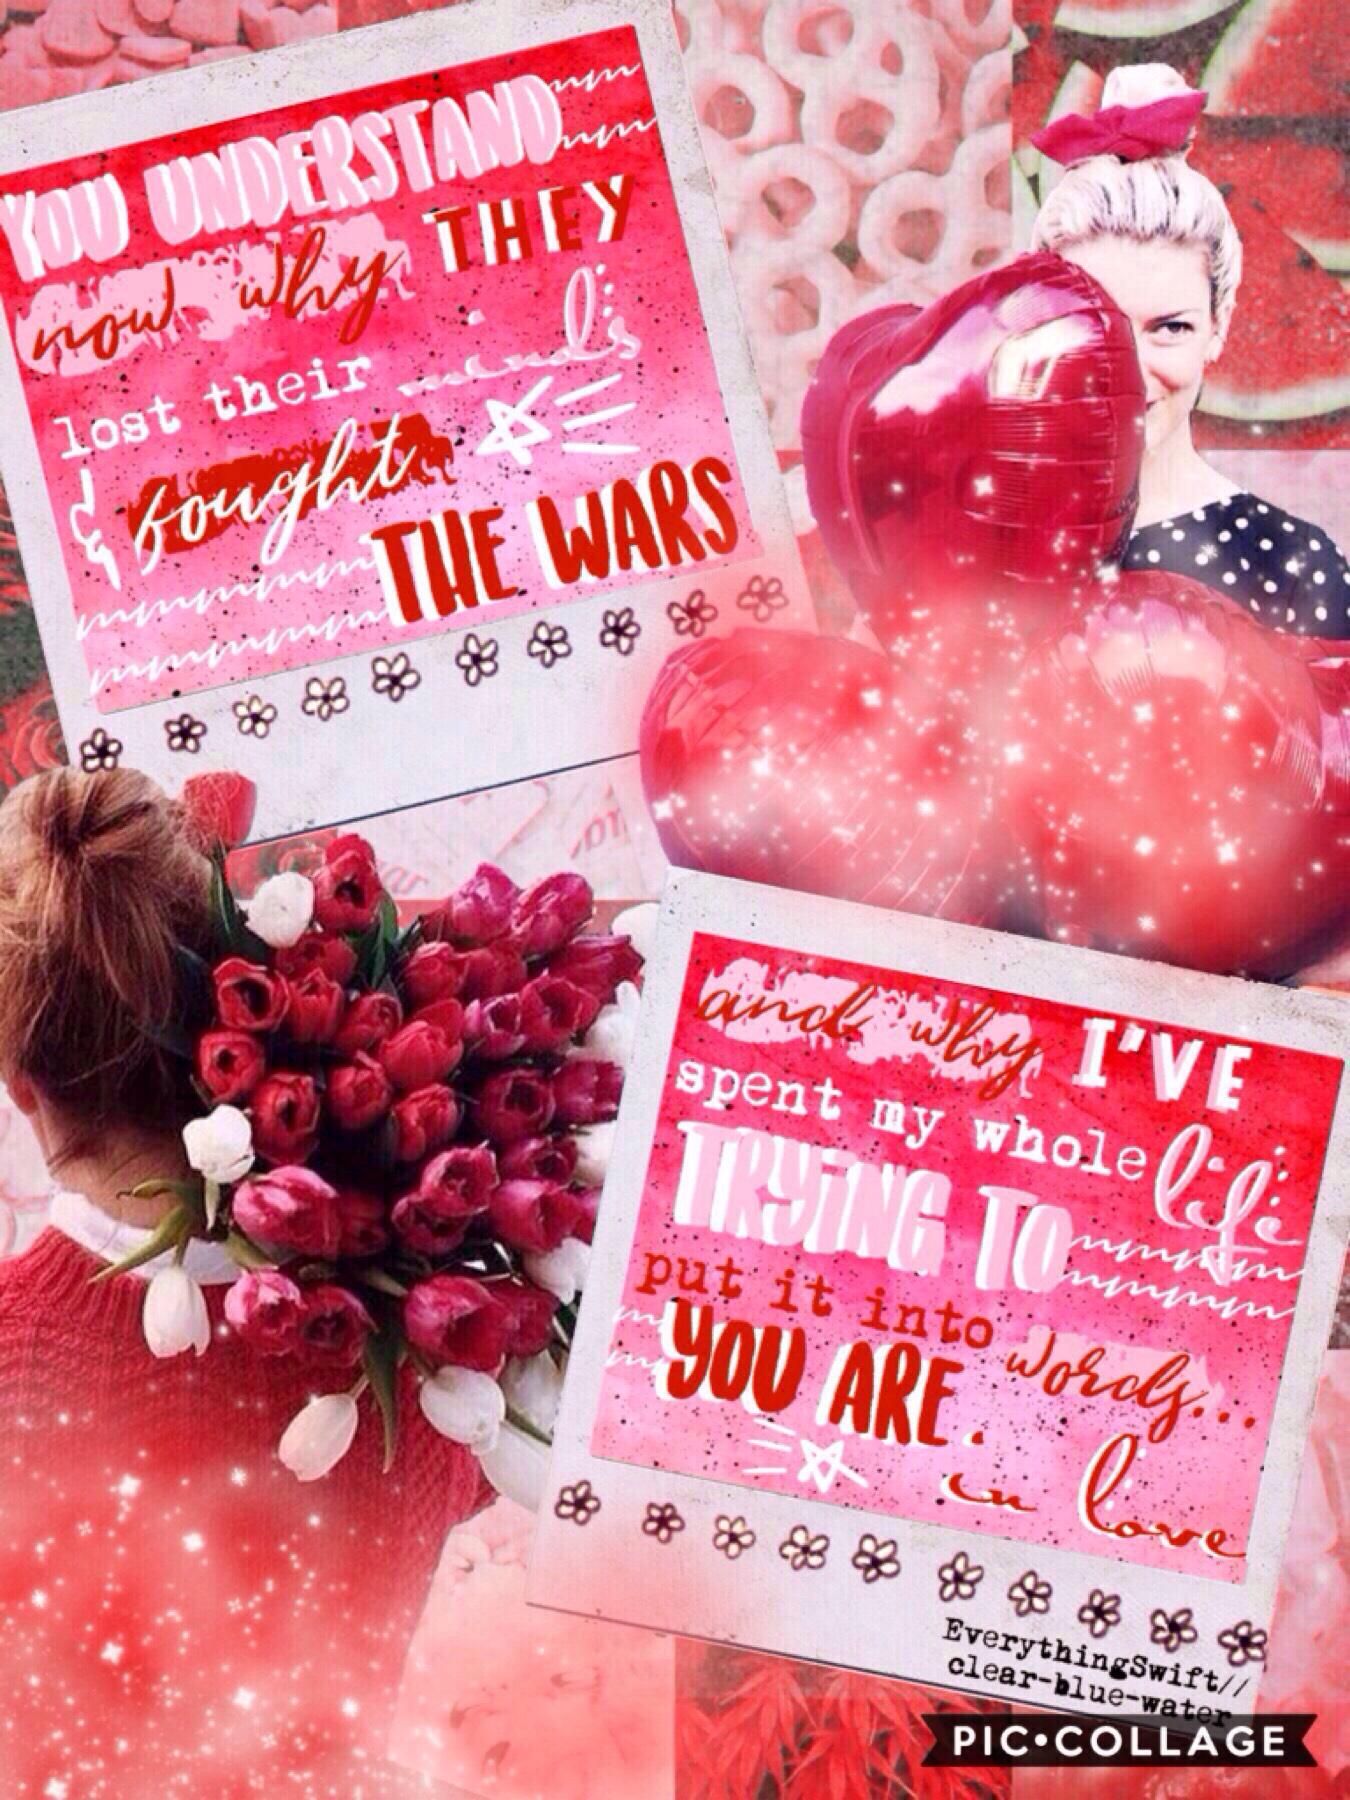 ❤️T A P❤️
Happy Valentines Day!!!! This is a collab with my bestie Abby (@EverythingSwift)💕
QOTD: Valentines Day or Galentines Day
AOTD: Galentines
